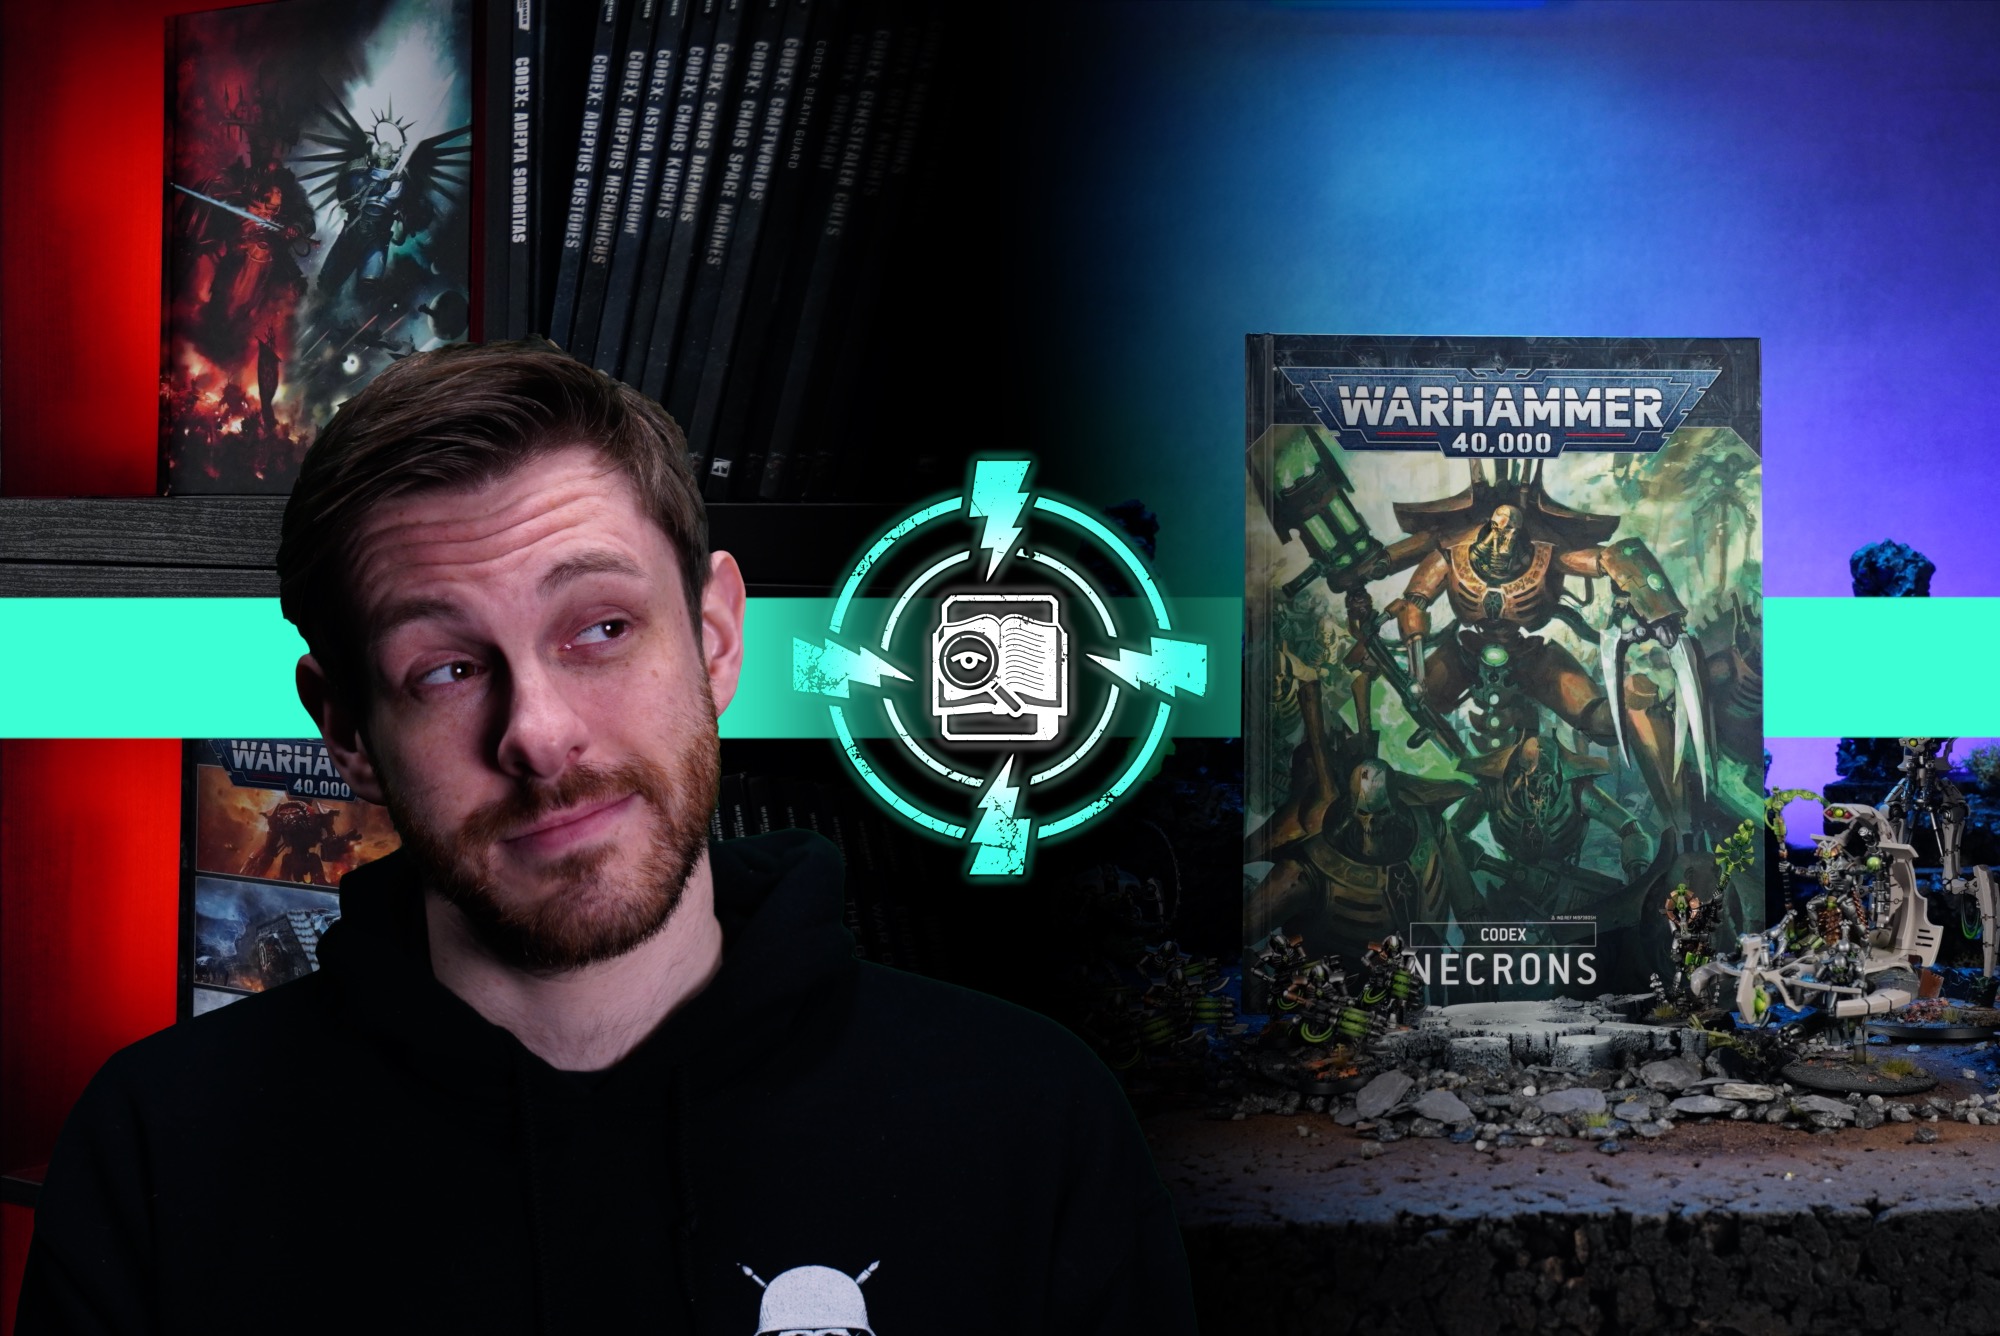 Leagues of Votann Unboxing, Lore and Codex Review  Warhammer 40,000  Faction Focus - Tabletop Tactics